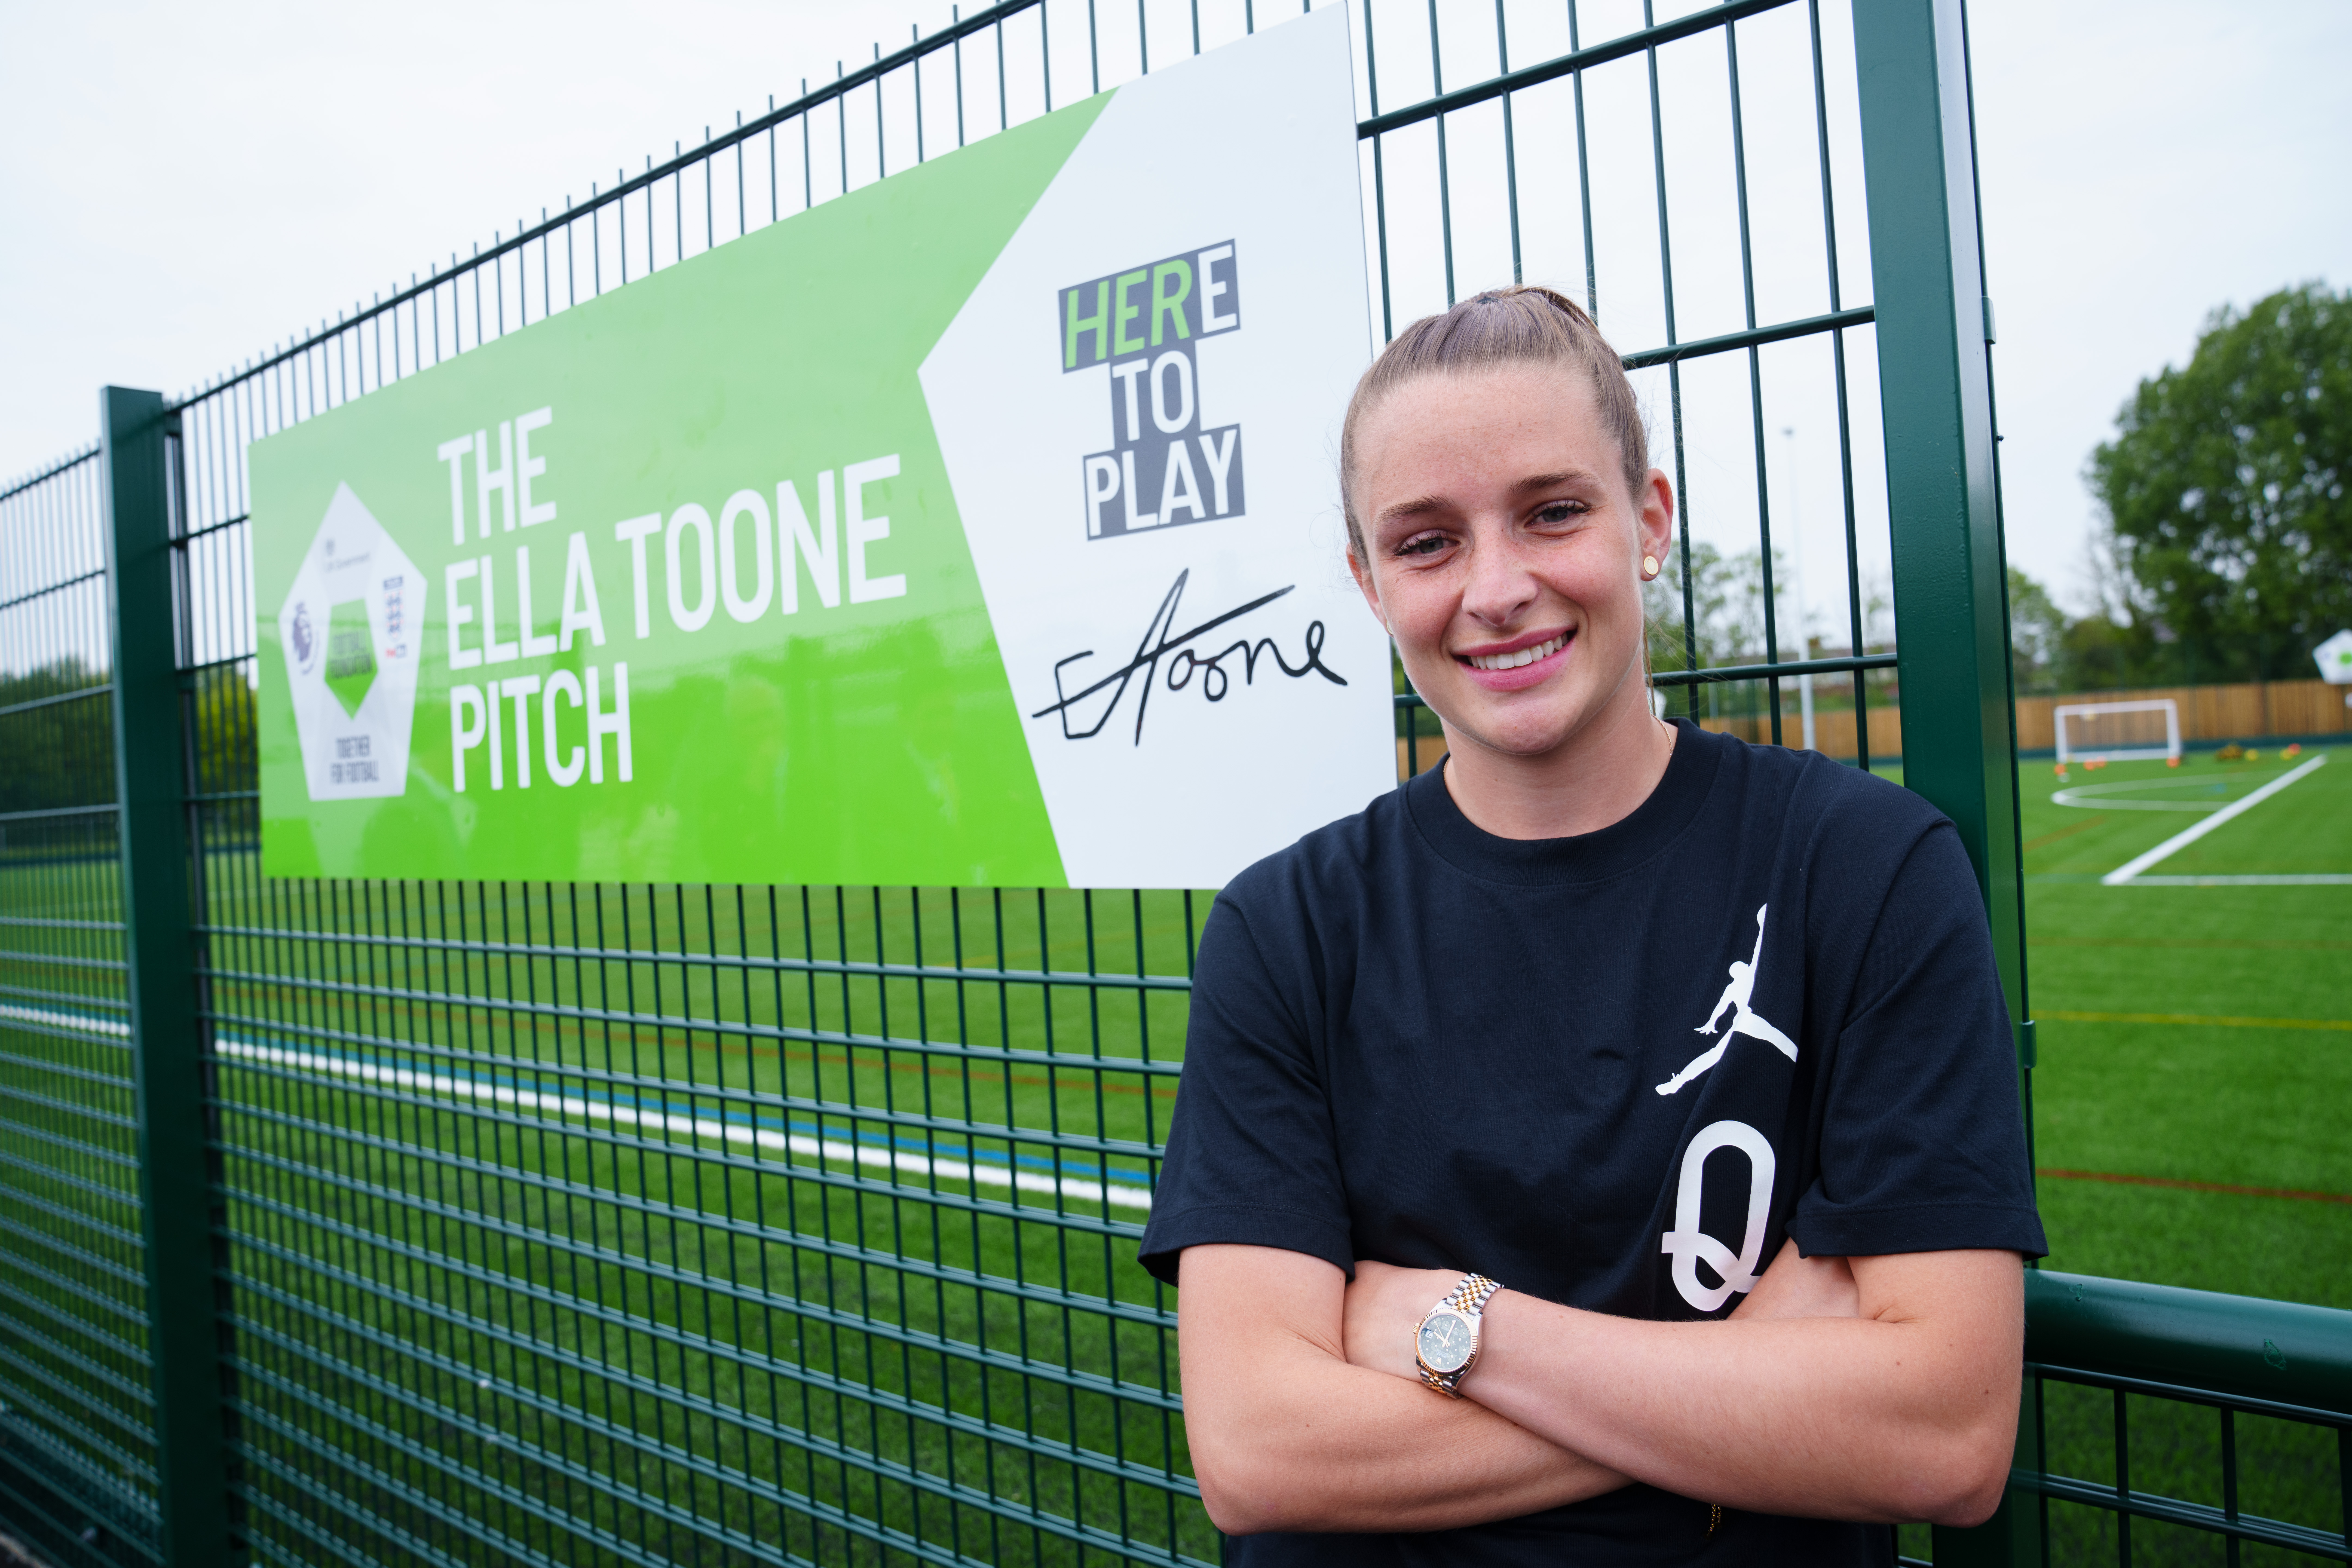 Toone at the unveiling on a pitch named after her in Wigan (the Football Foundation)